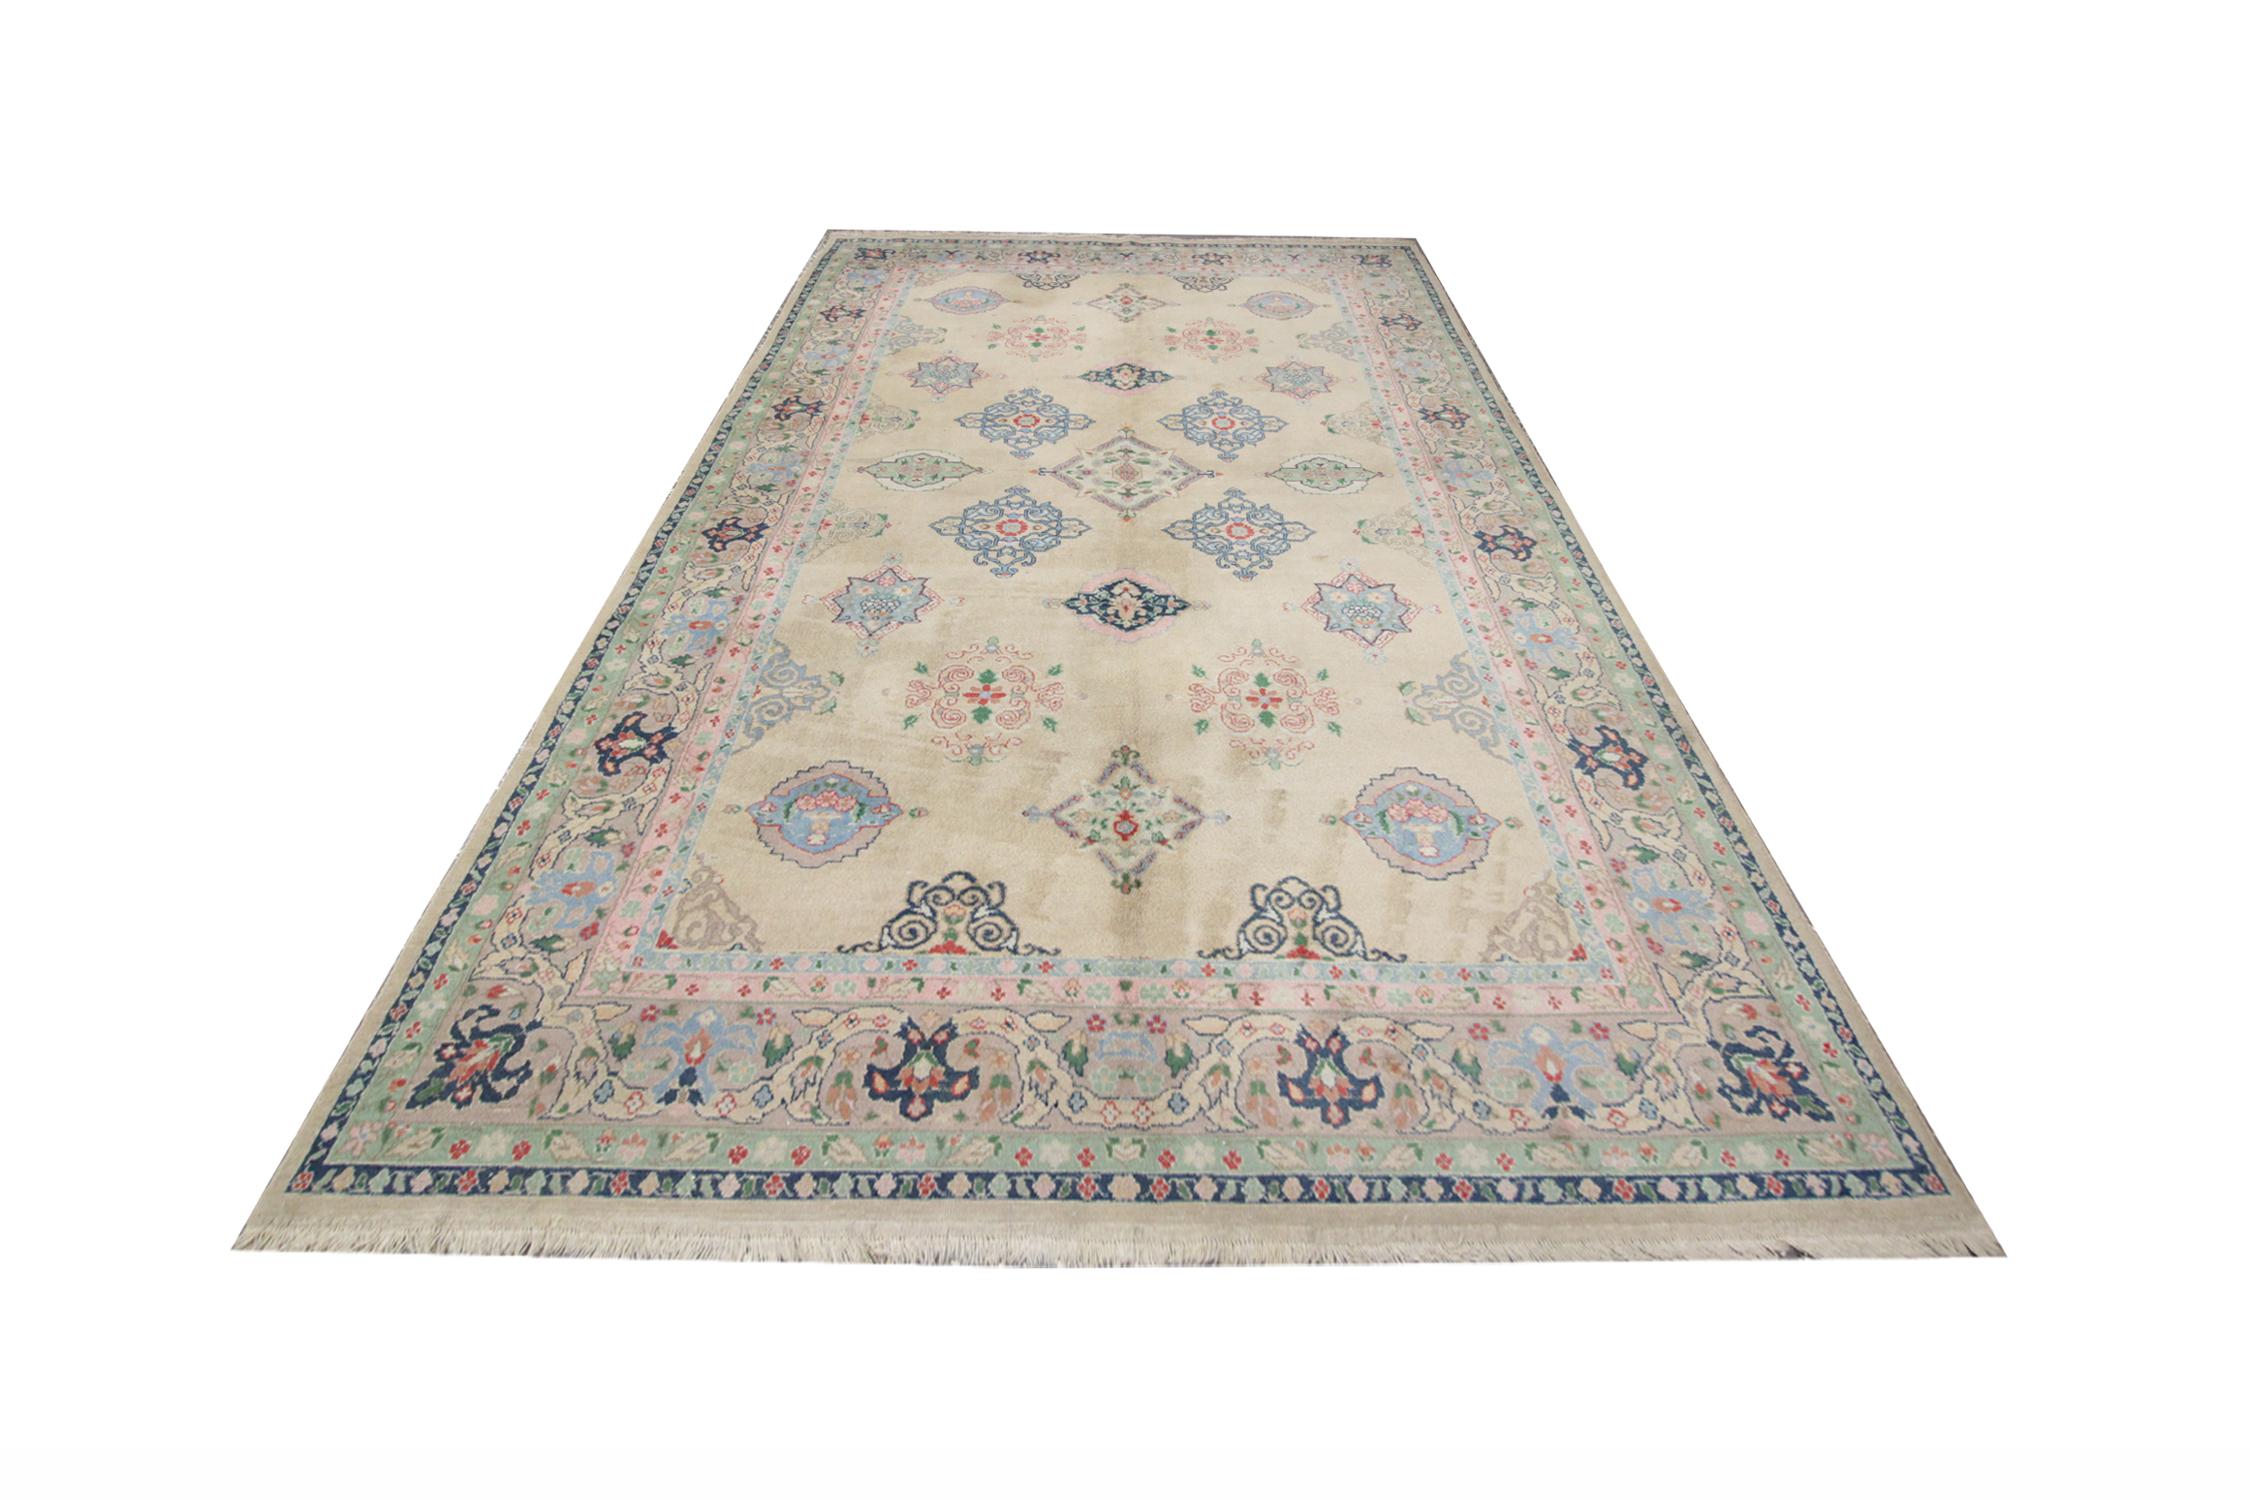 This rug is an example of a handmade carpet in Turkey by skilled weavers. Handspun wool is used with natural dyes, and the carpet is professionally washed and finished. These traditional rugs are our luxury rugs made of our looms by our master